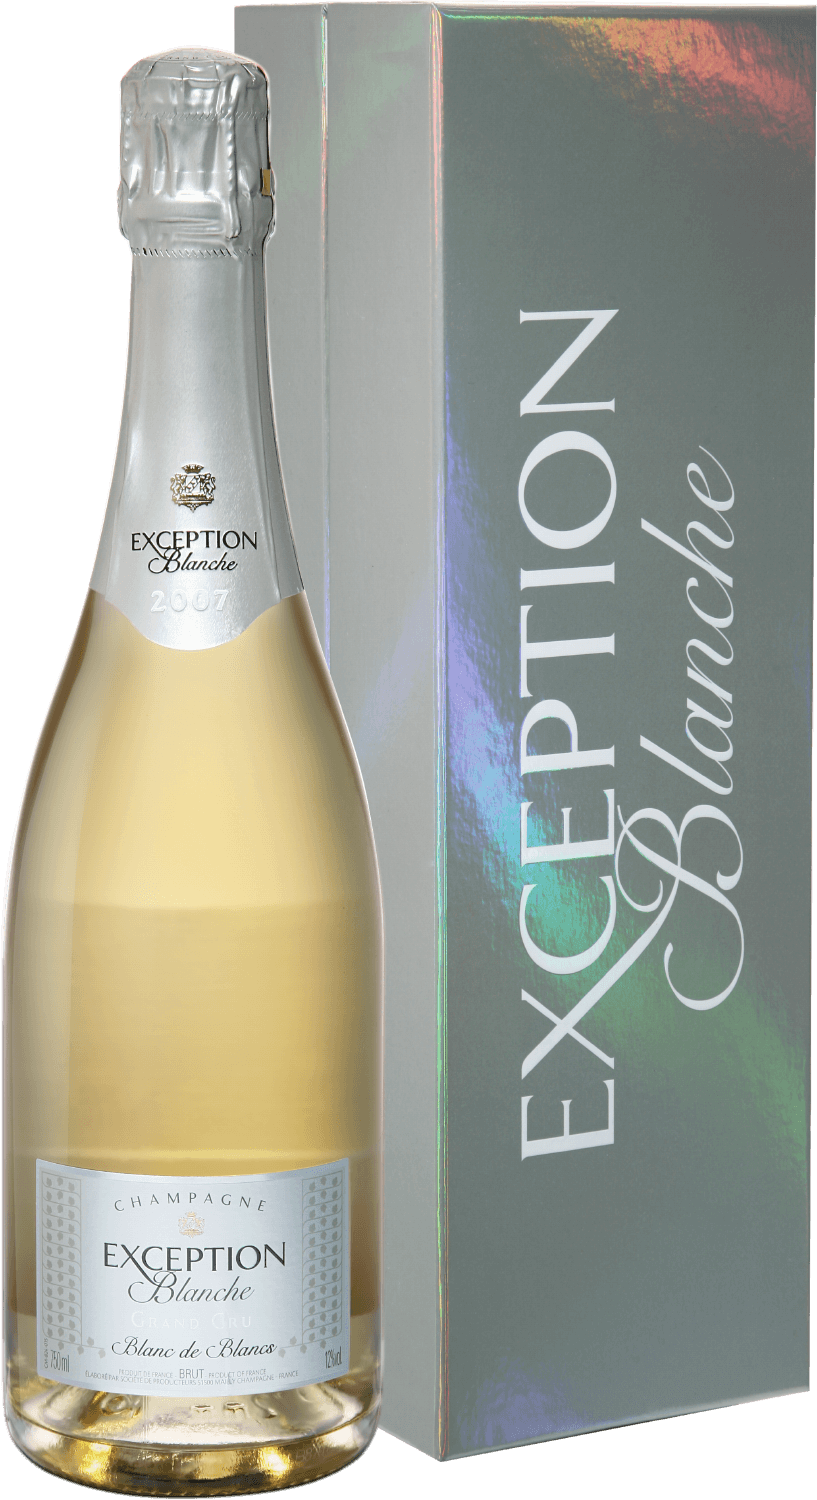 mailly grand cru brut blanc de pinot noir champagne аос Mailly Grand Cru Exception Blanche Blanc De Blancs Millesime Champagne AOC (gift box)